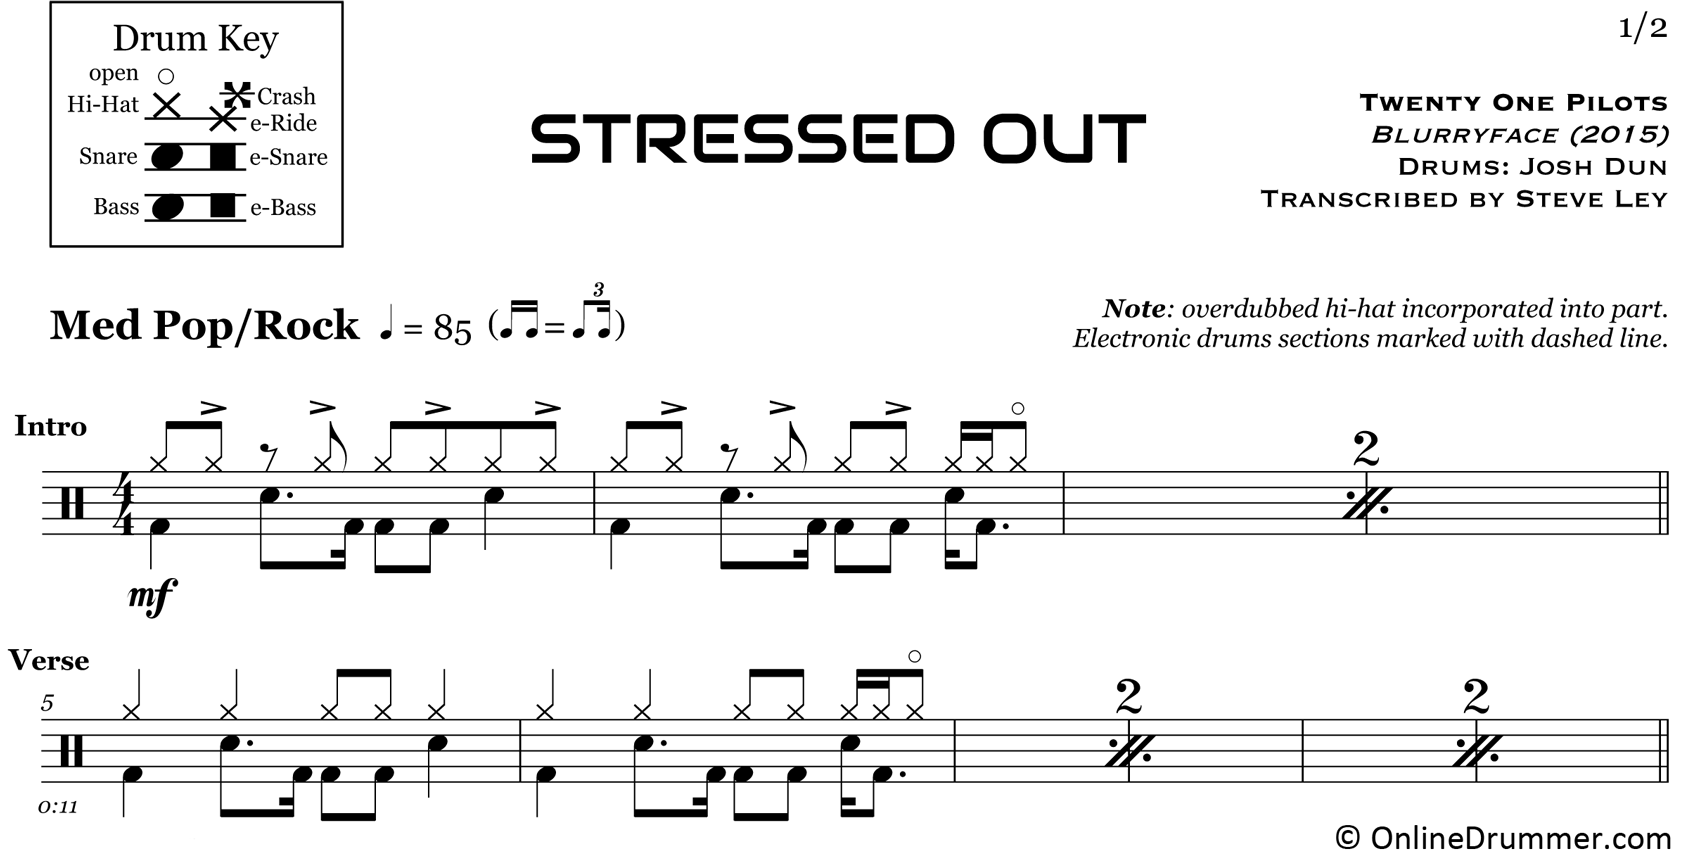 Stressed Out - Twenty One Pilots - Drum Sheet Music